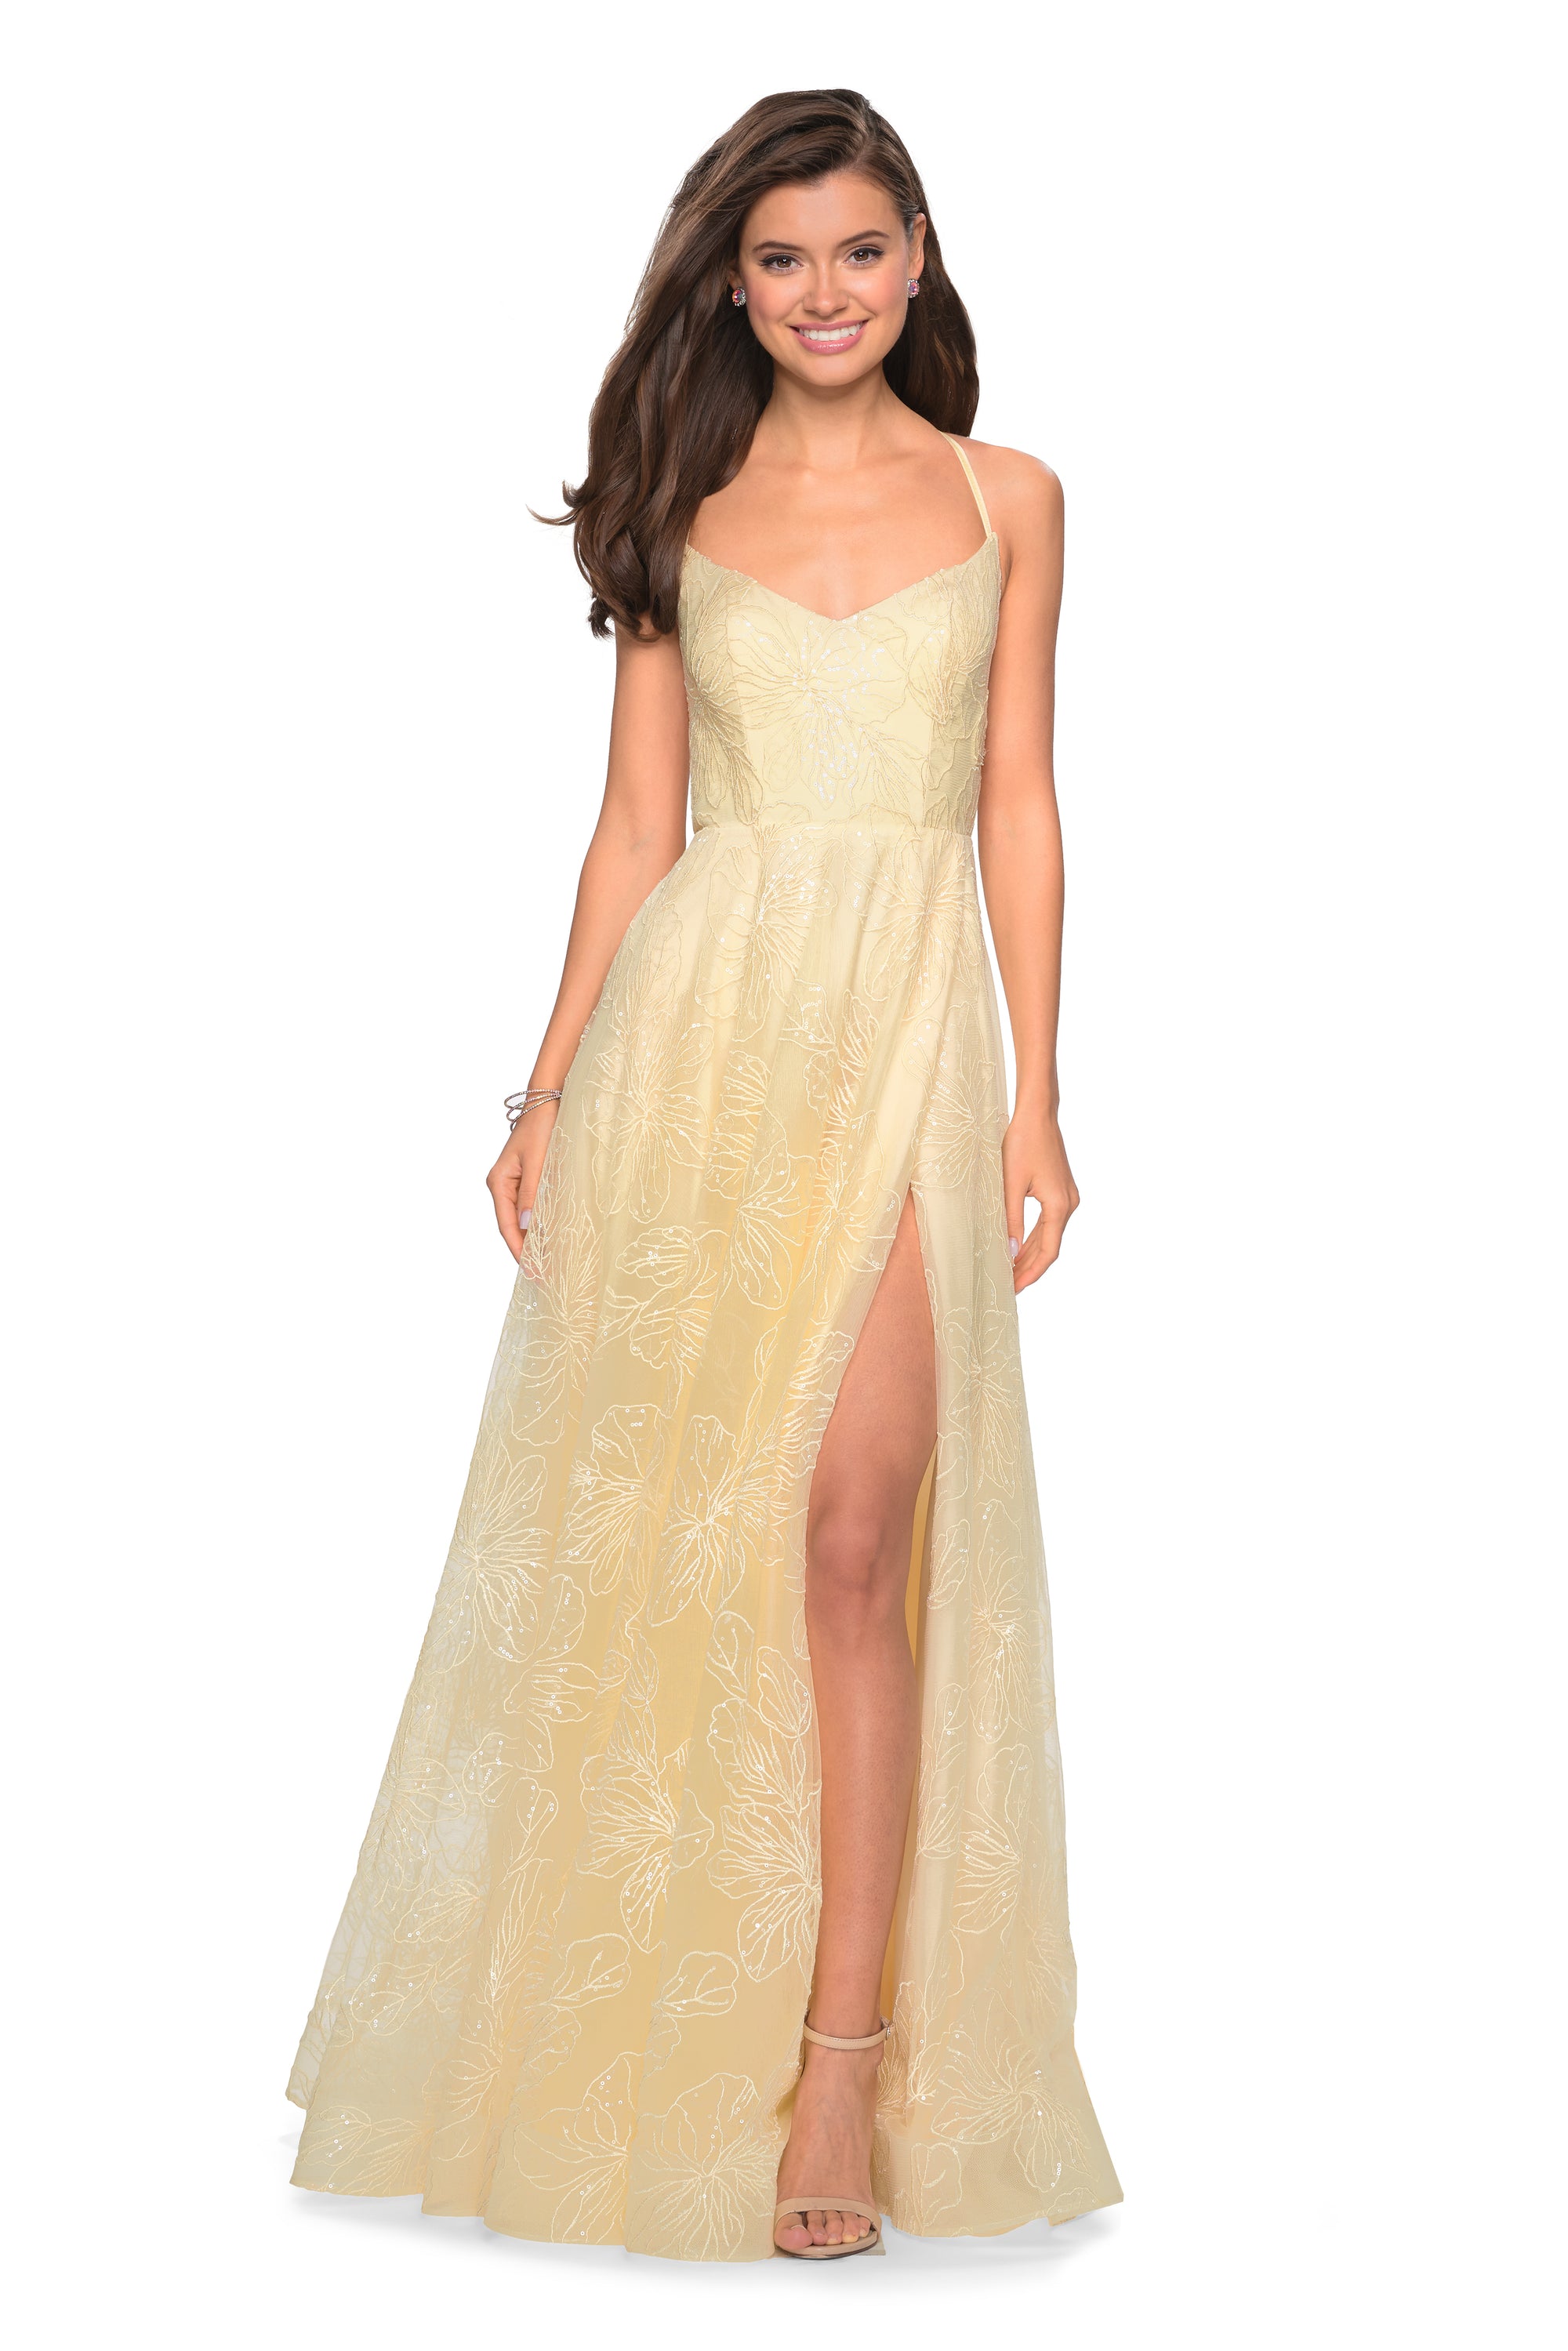 Pale Yellow La Femme Embroidered Long A-Line Formal Dress